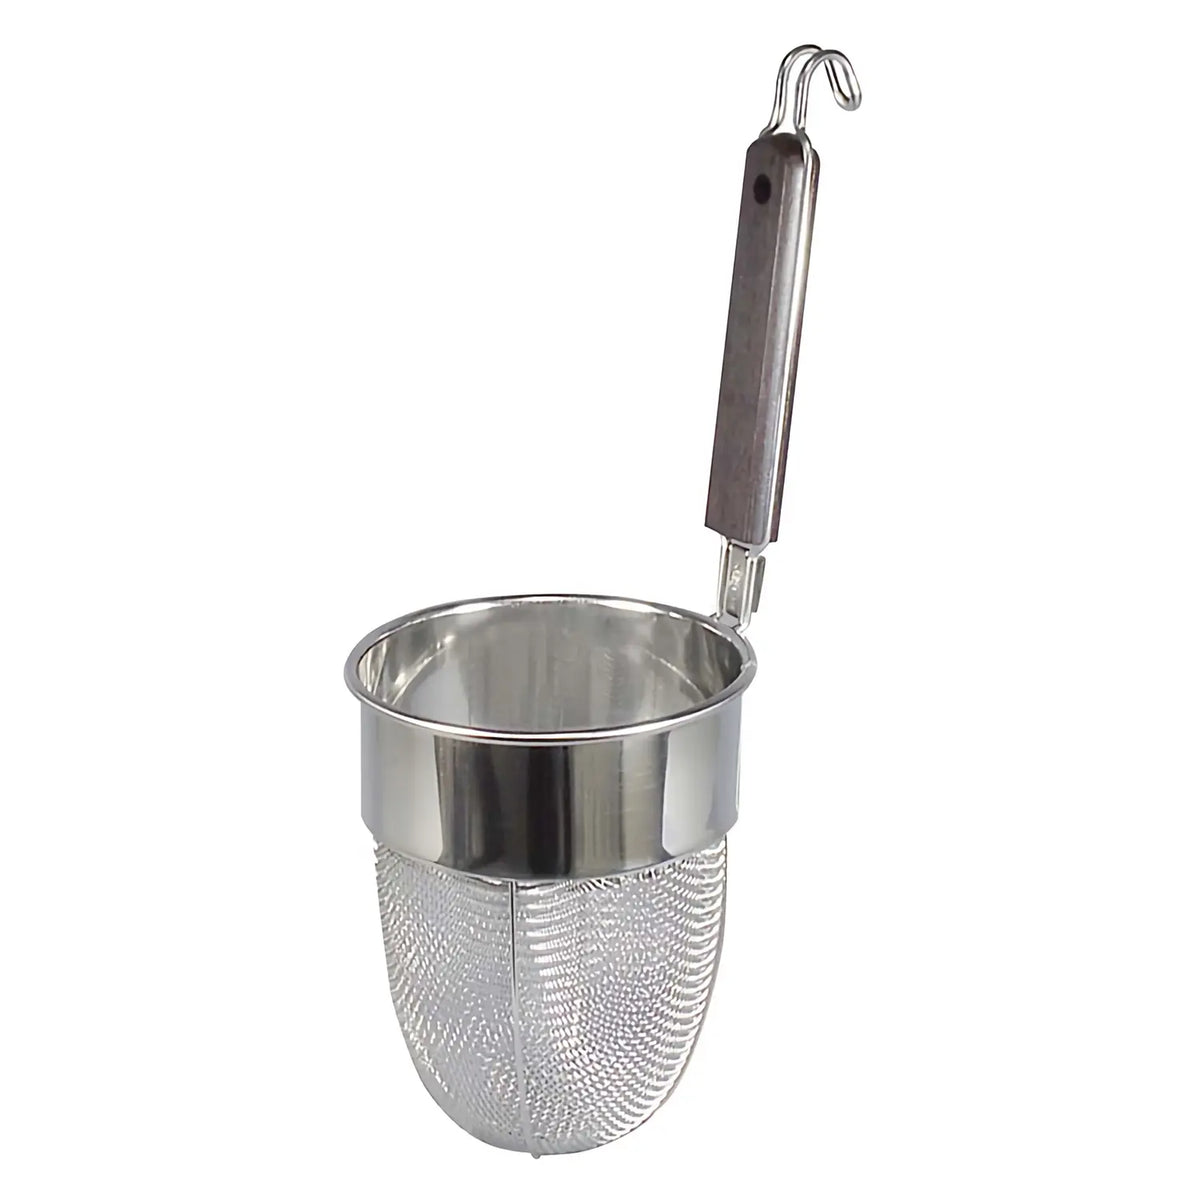 Fujiboshi Stainless Steel Deep Udon Tebo Noodle Strainer Round Base with Wooden Handle